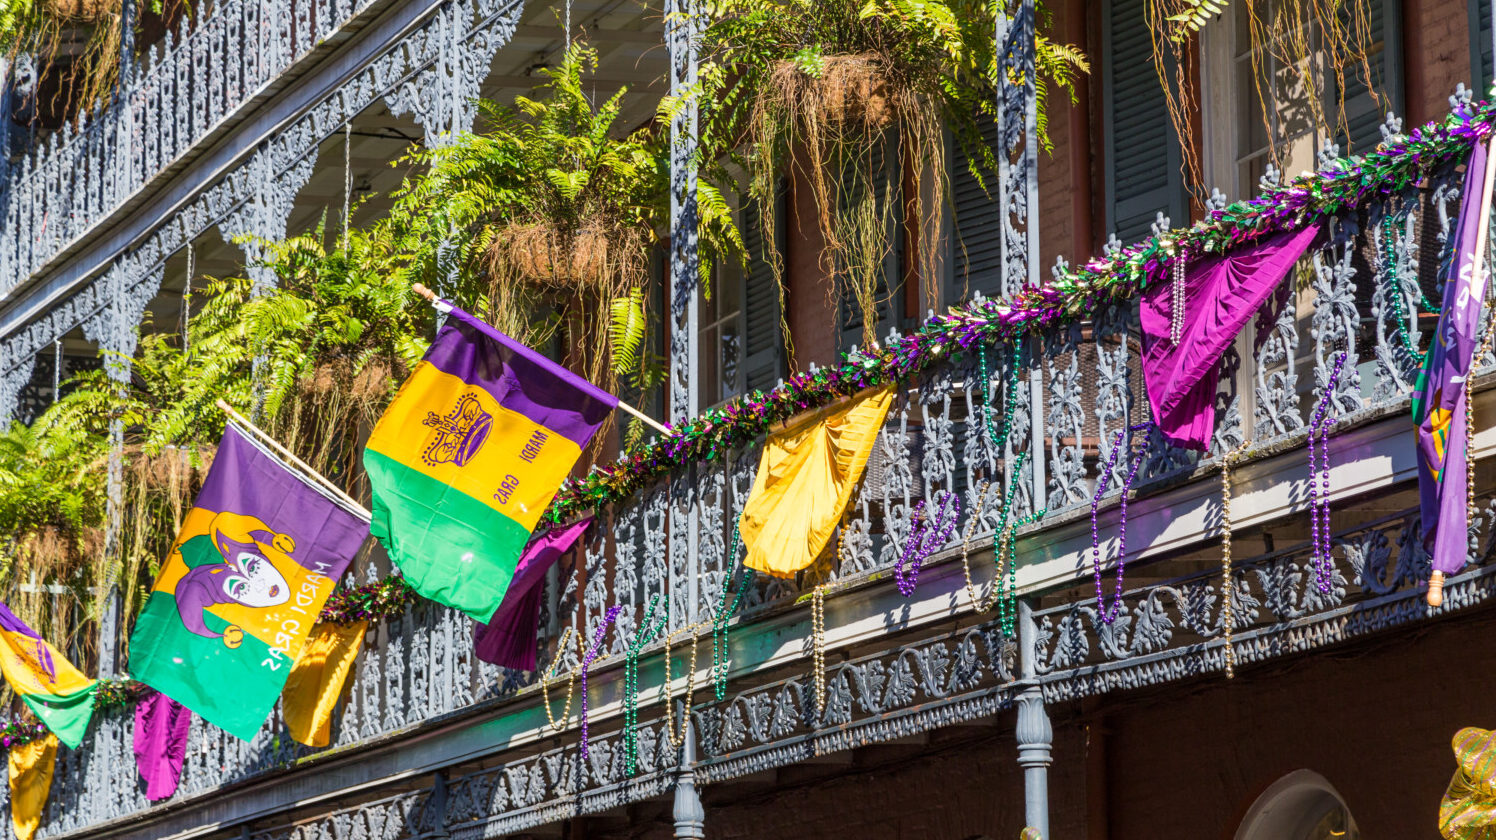 French Quarter decorated for Mardi Gras in New Orleans